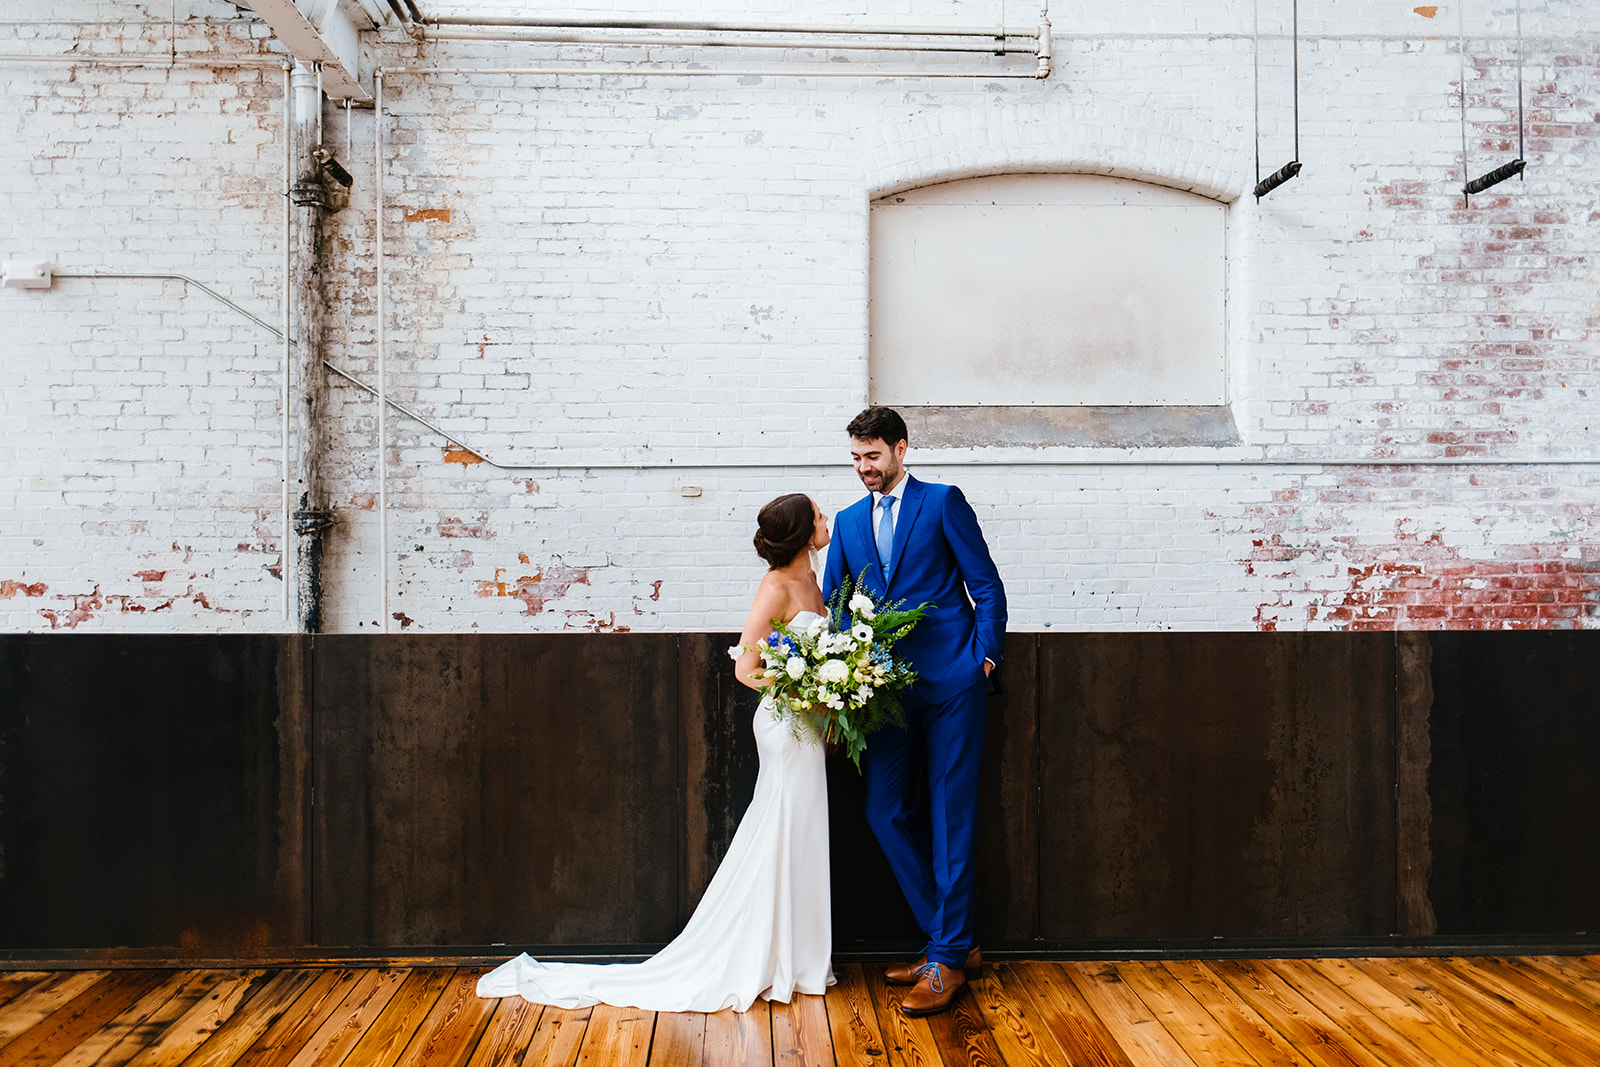 Bride and groom lean against a wall before their wedding ceremony starts.